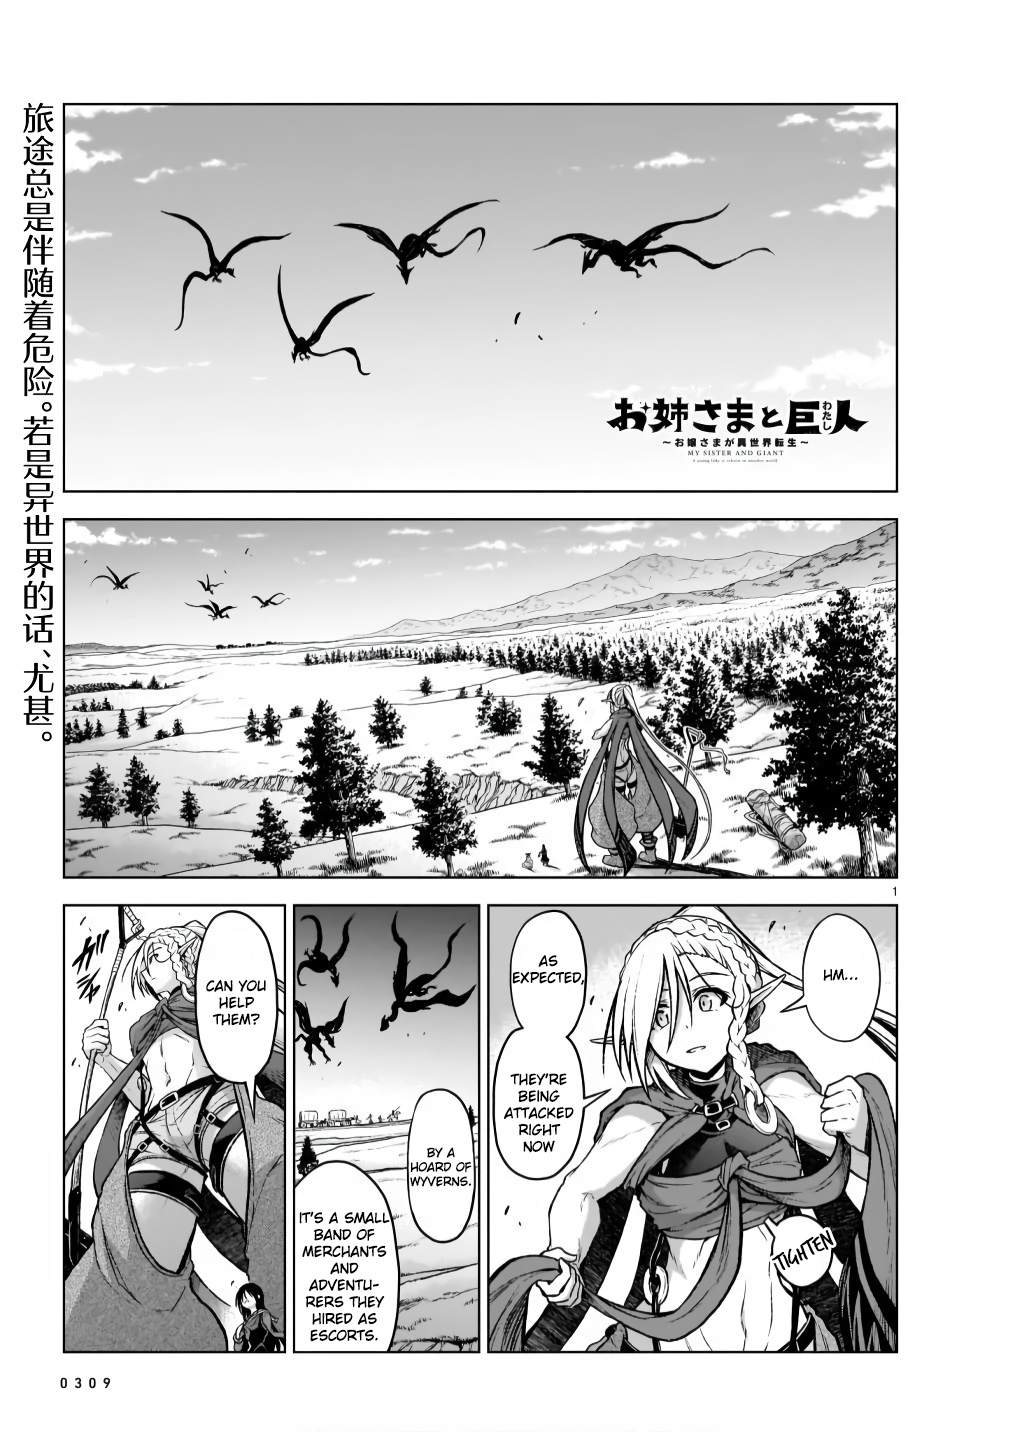 The Onee-Sama And The Giant - Page 1